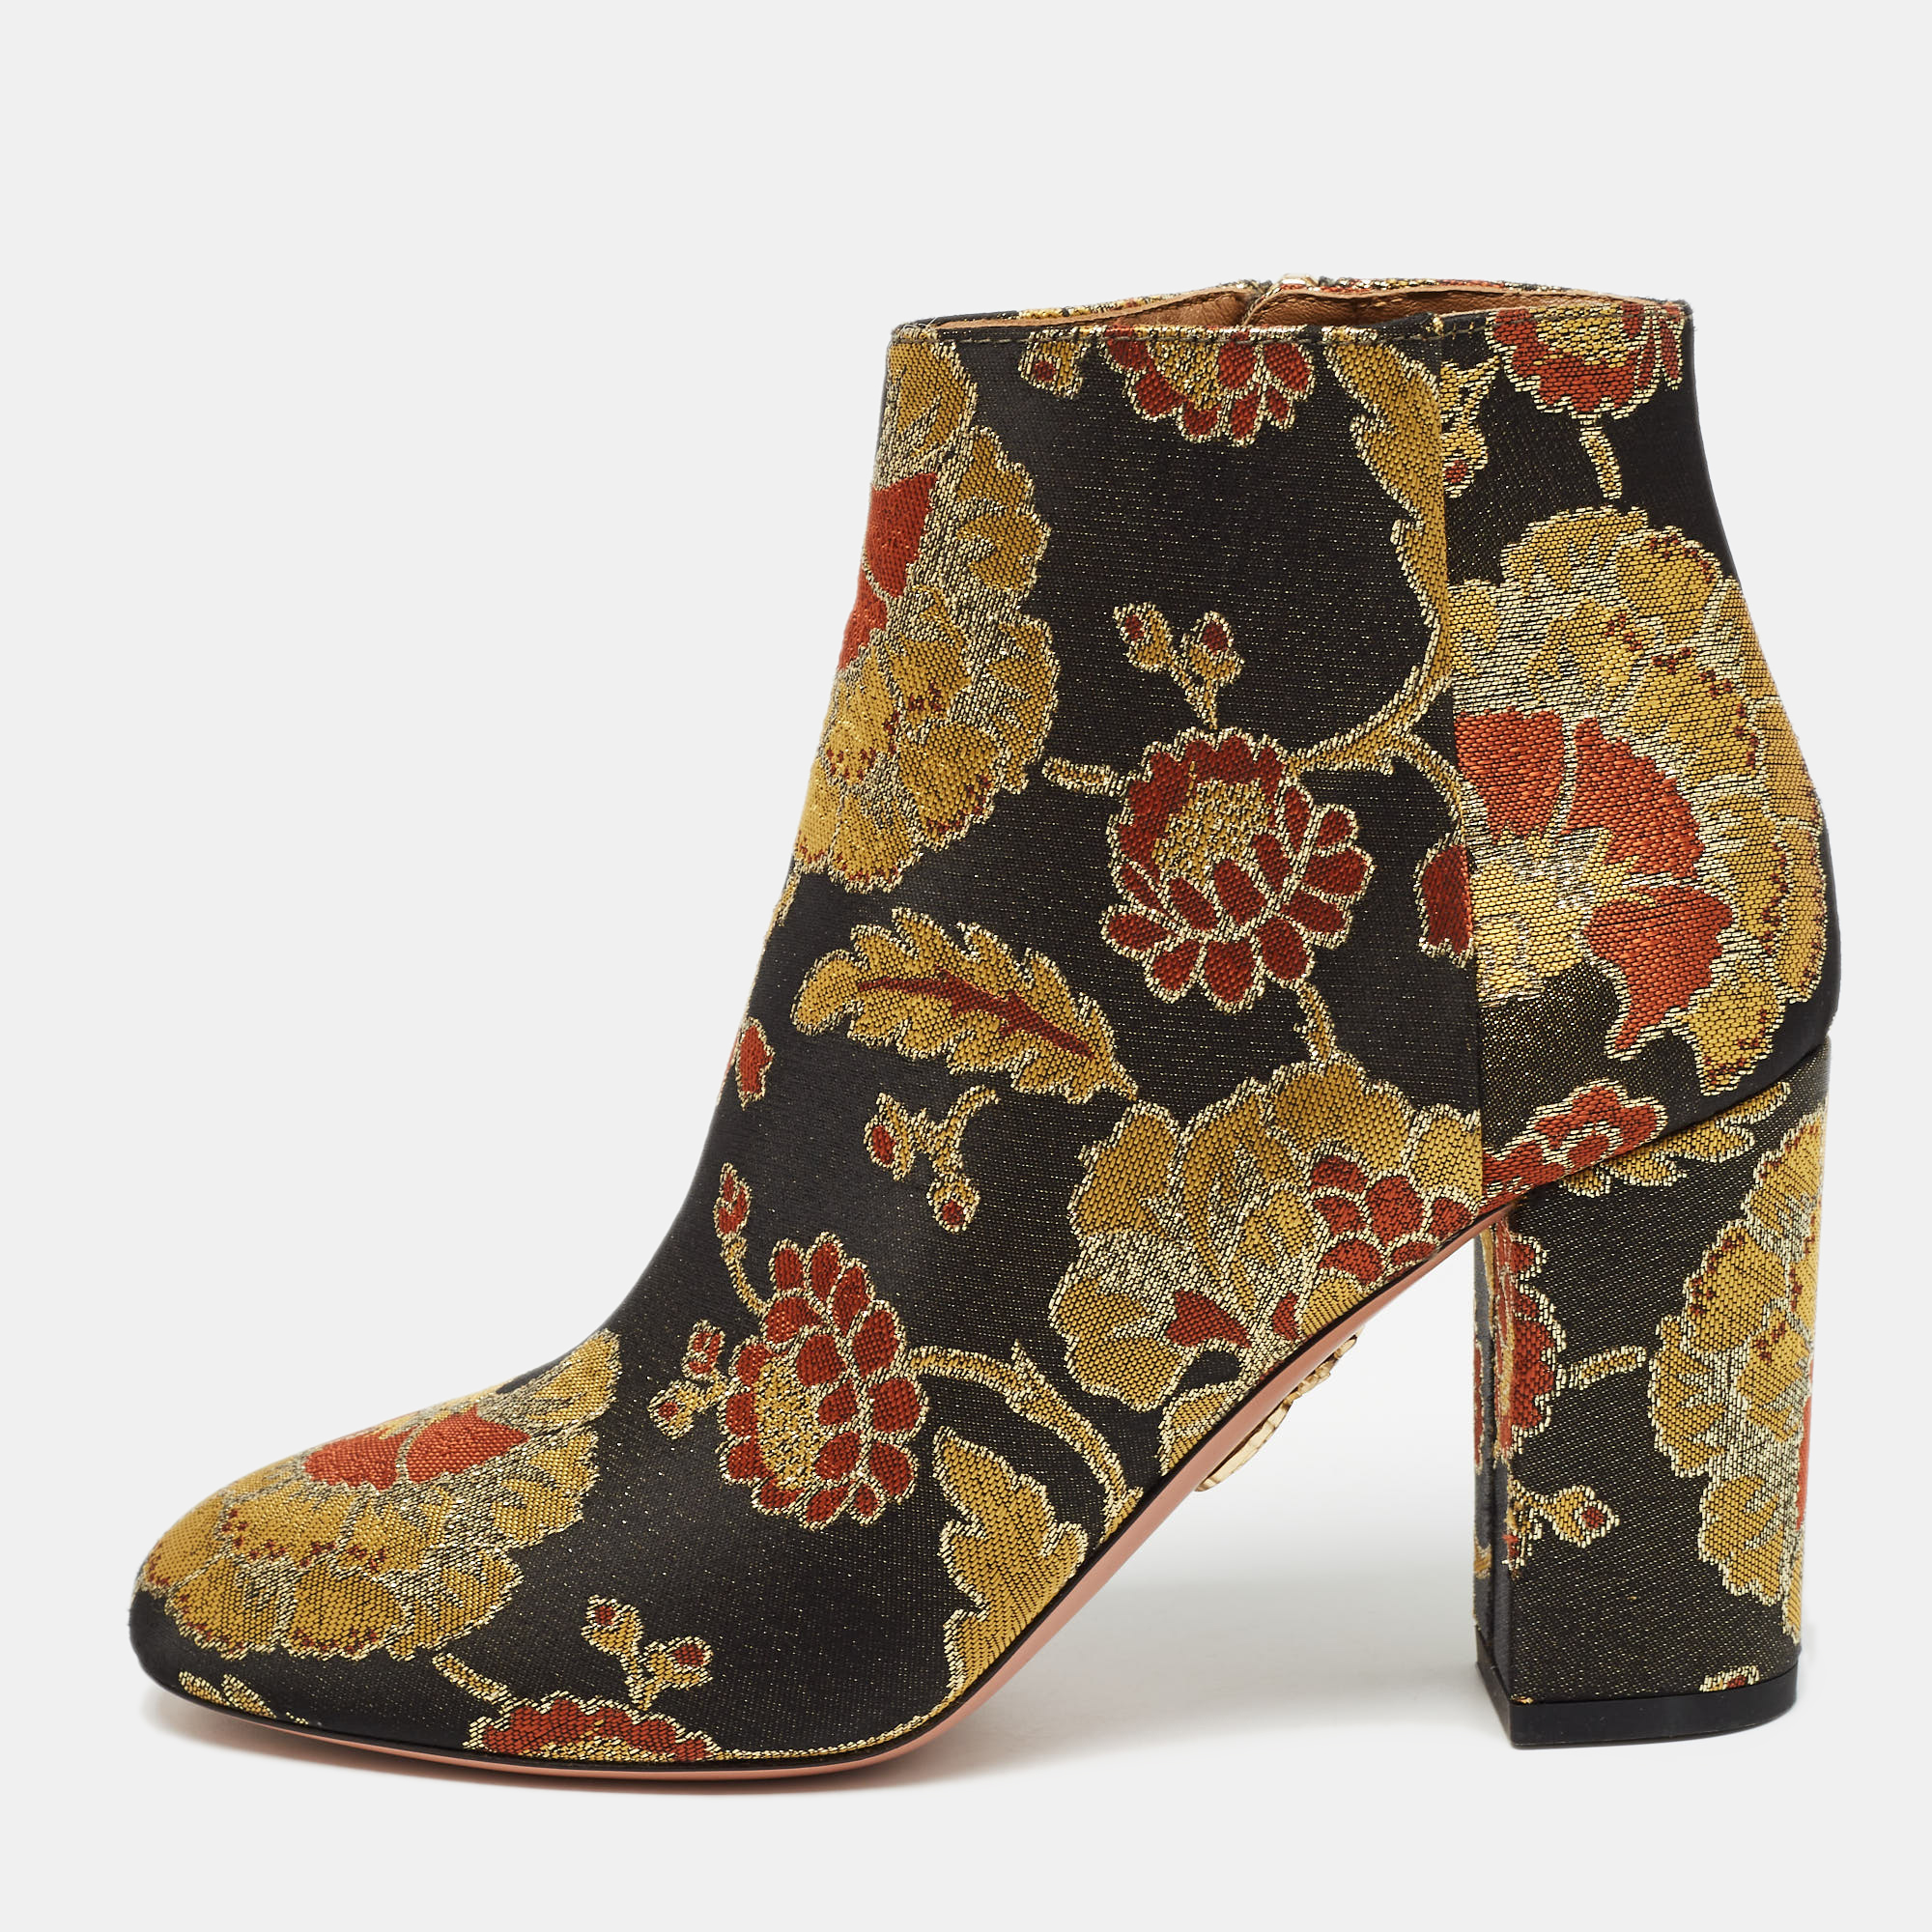 Multicolor Floral Brocade Fabric Zip Ankle Boots